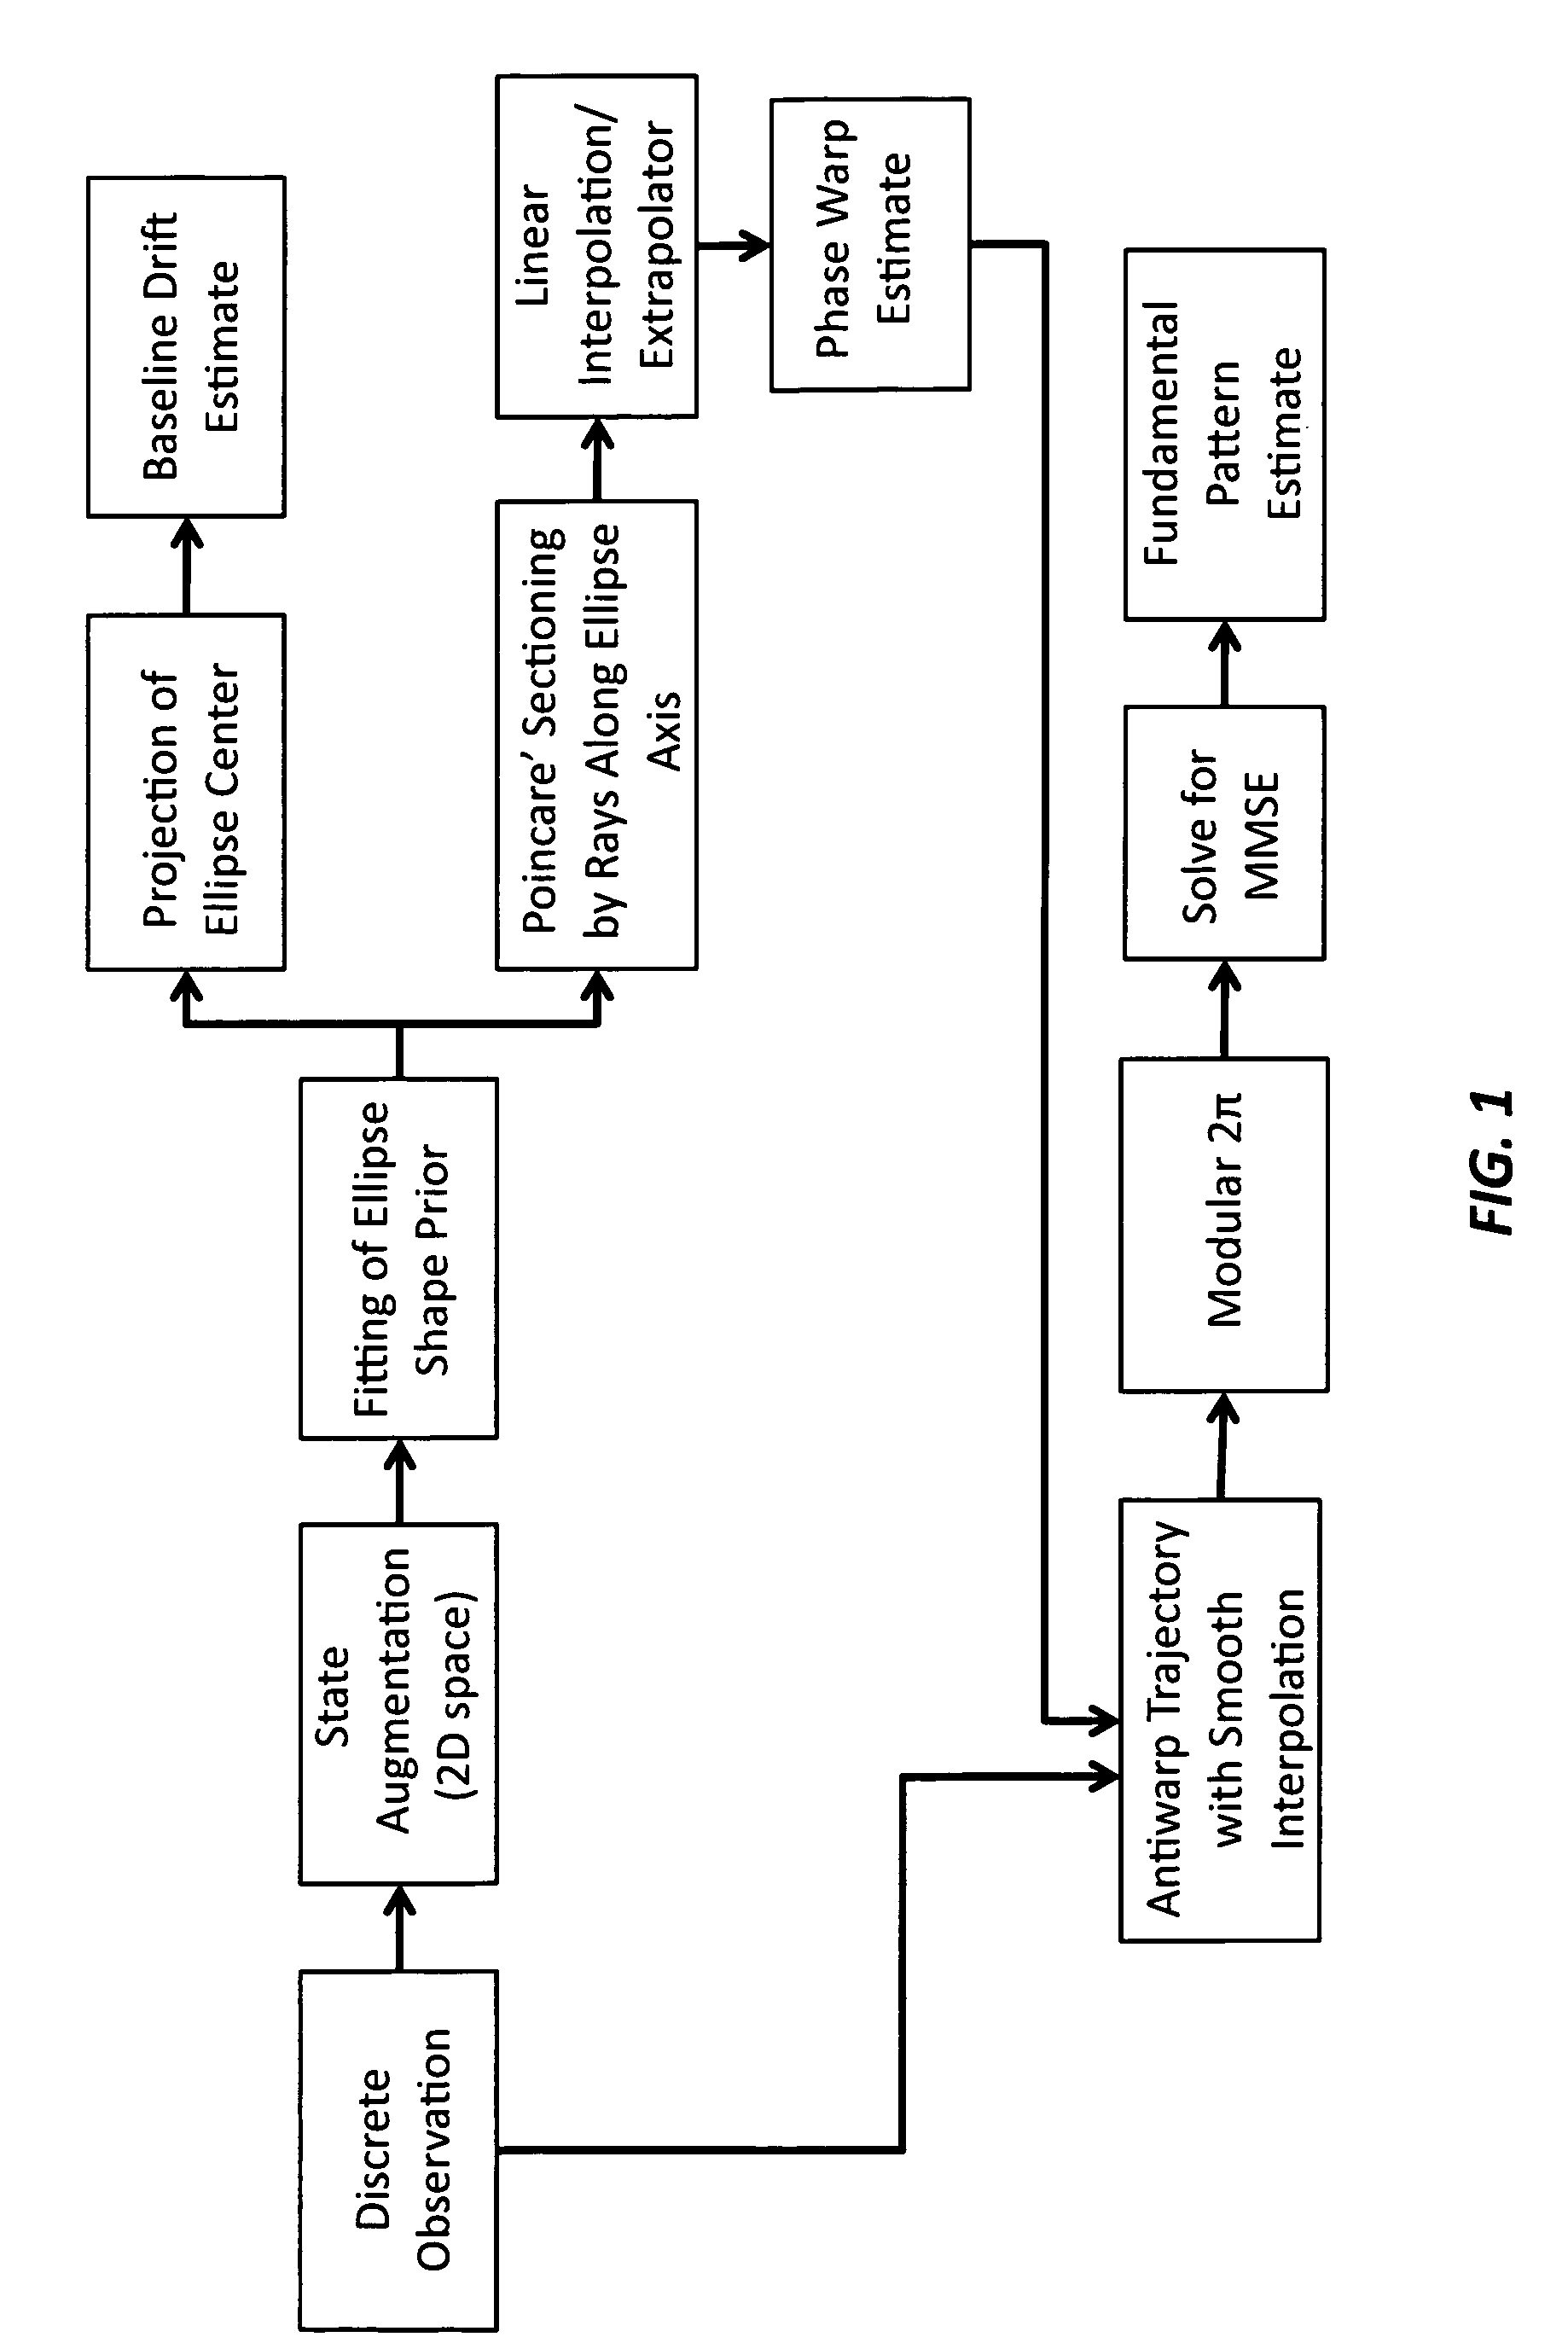 Method and system for real-time profiling respiratory motion with variable-horizon prediction capability